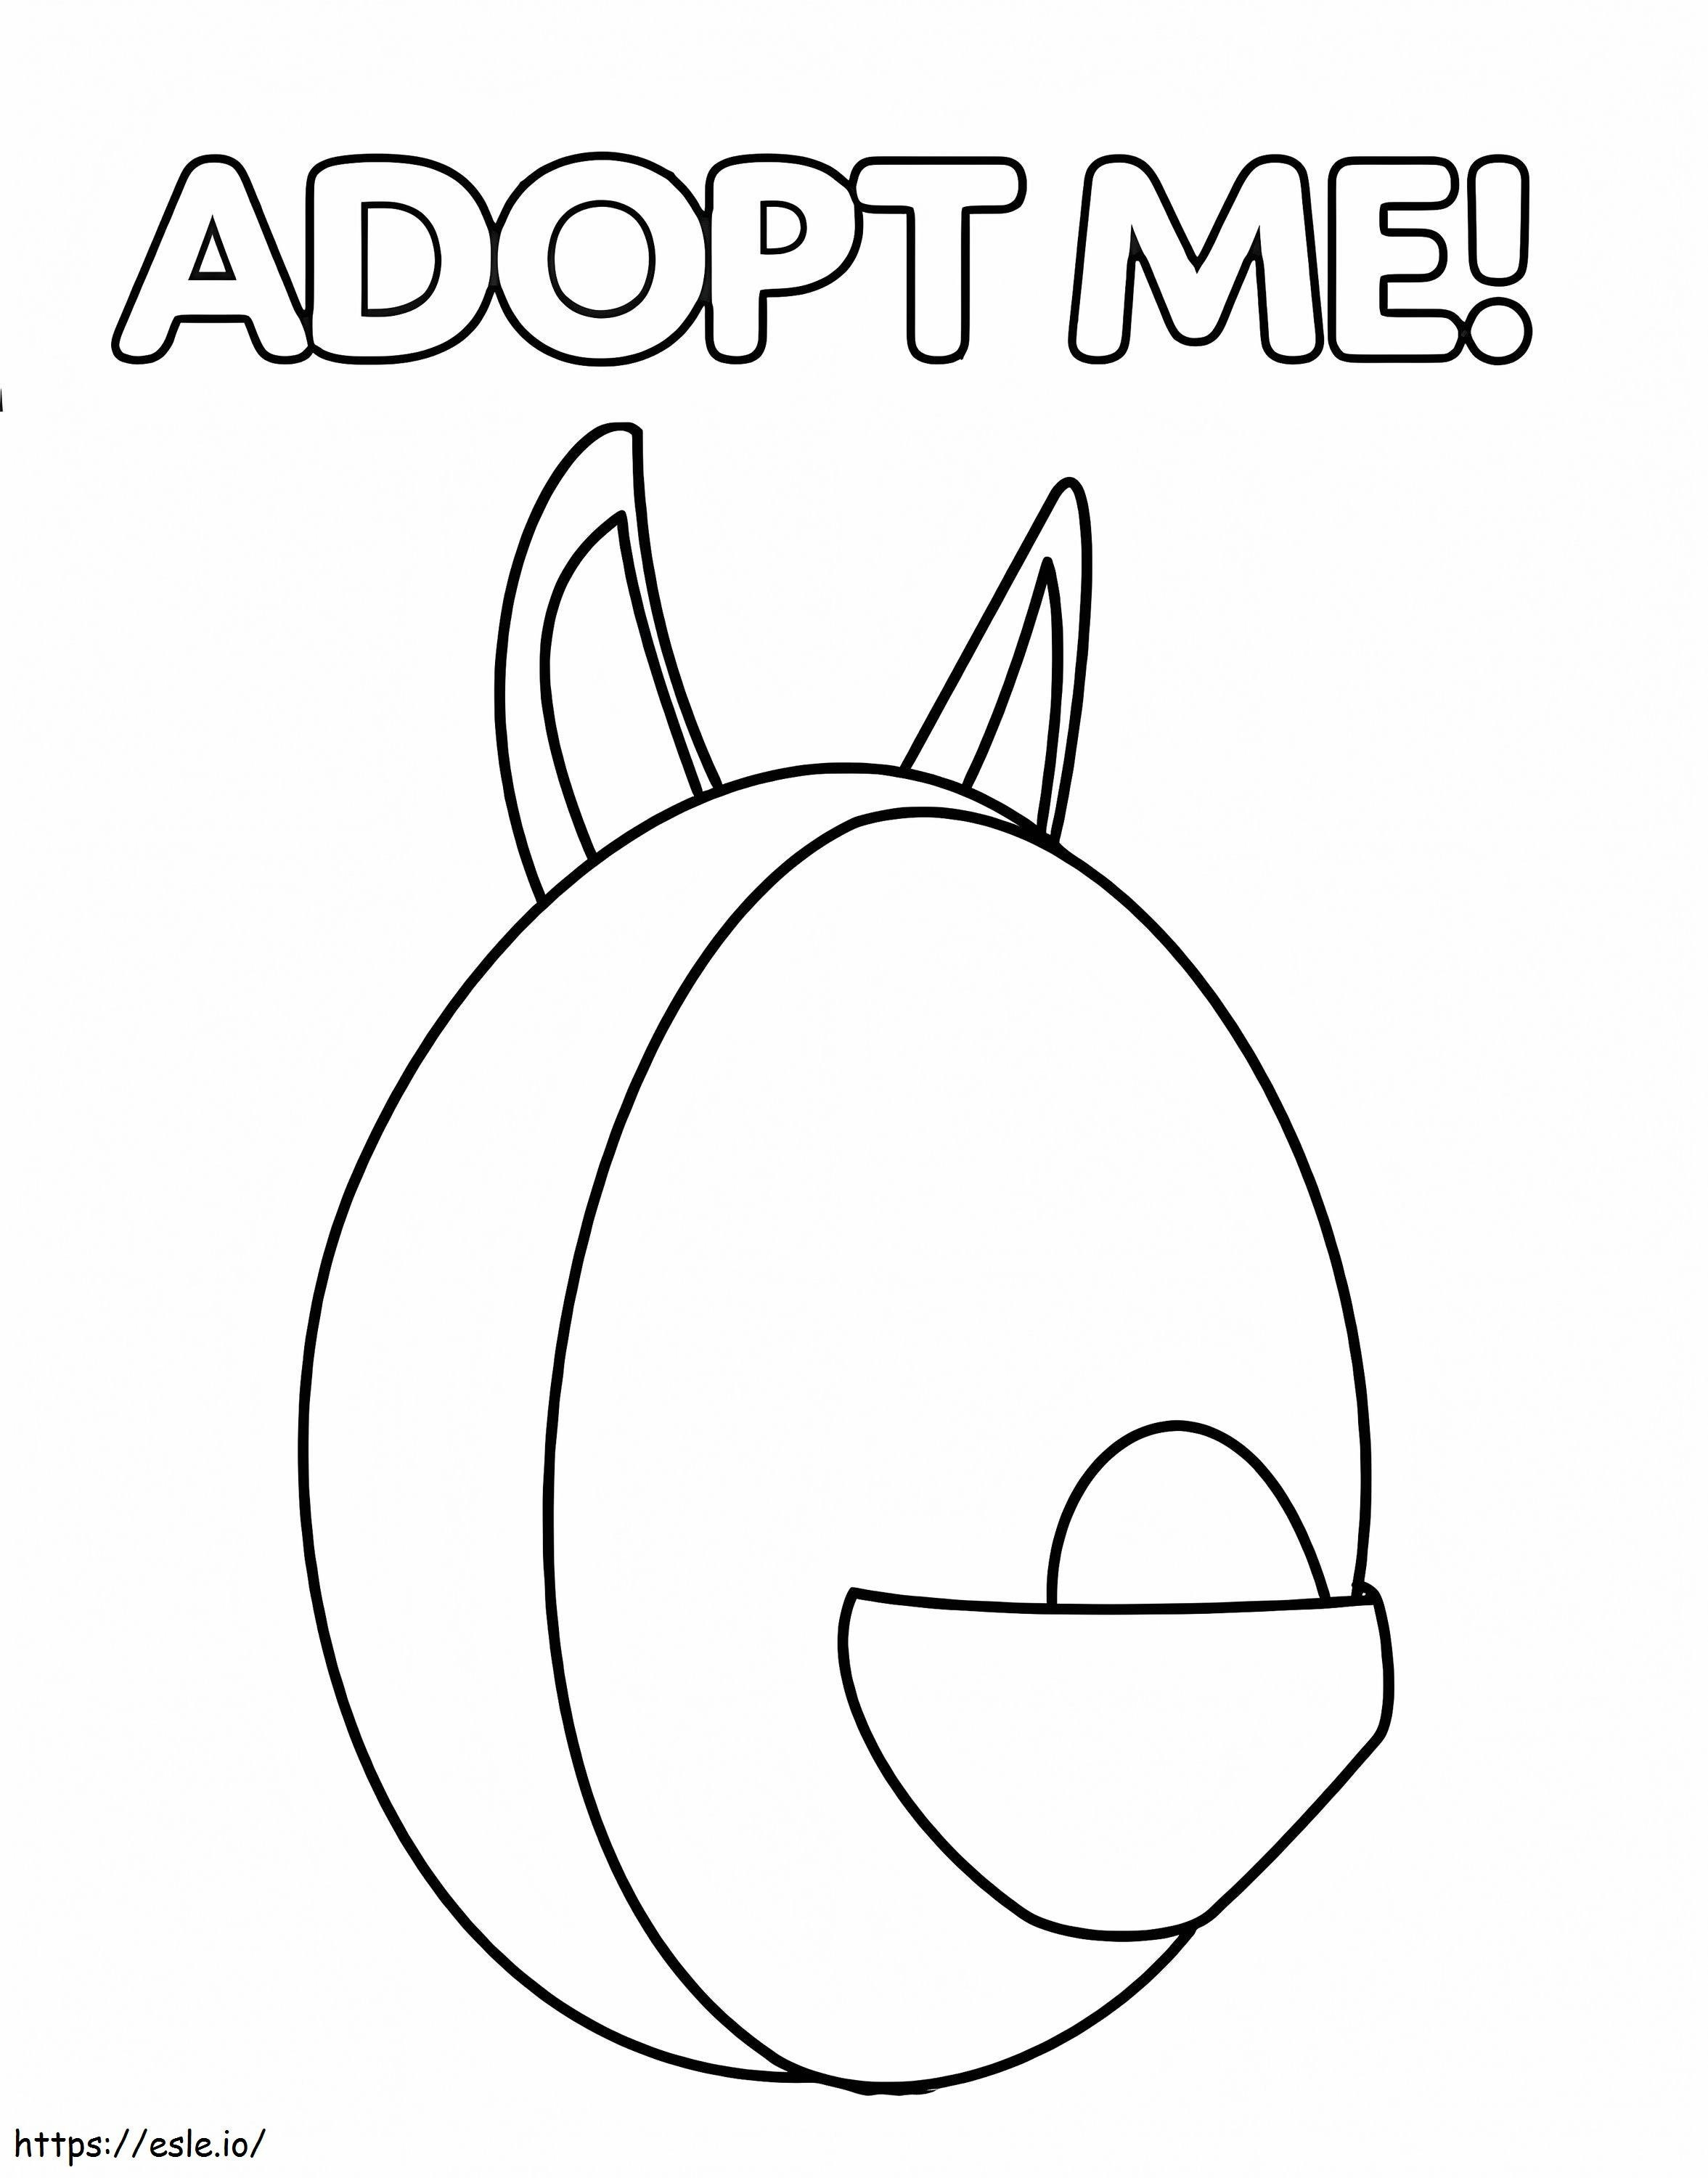 Aussie Egg Adopt Me coloring page